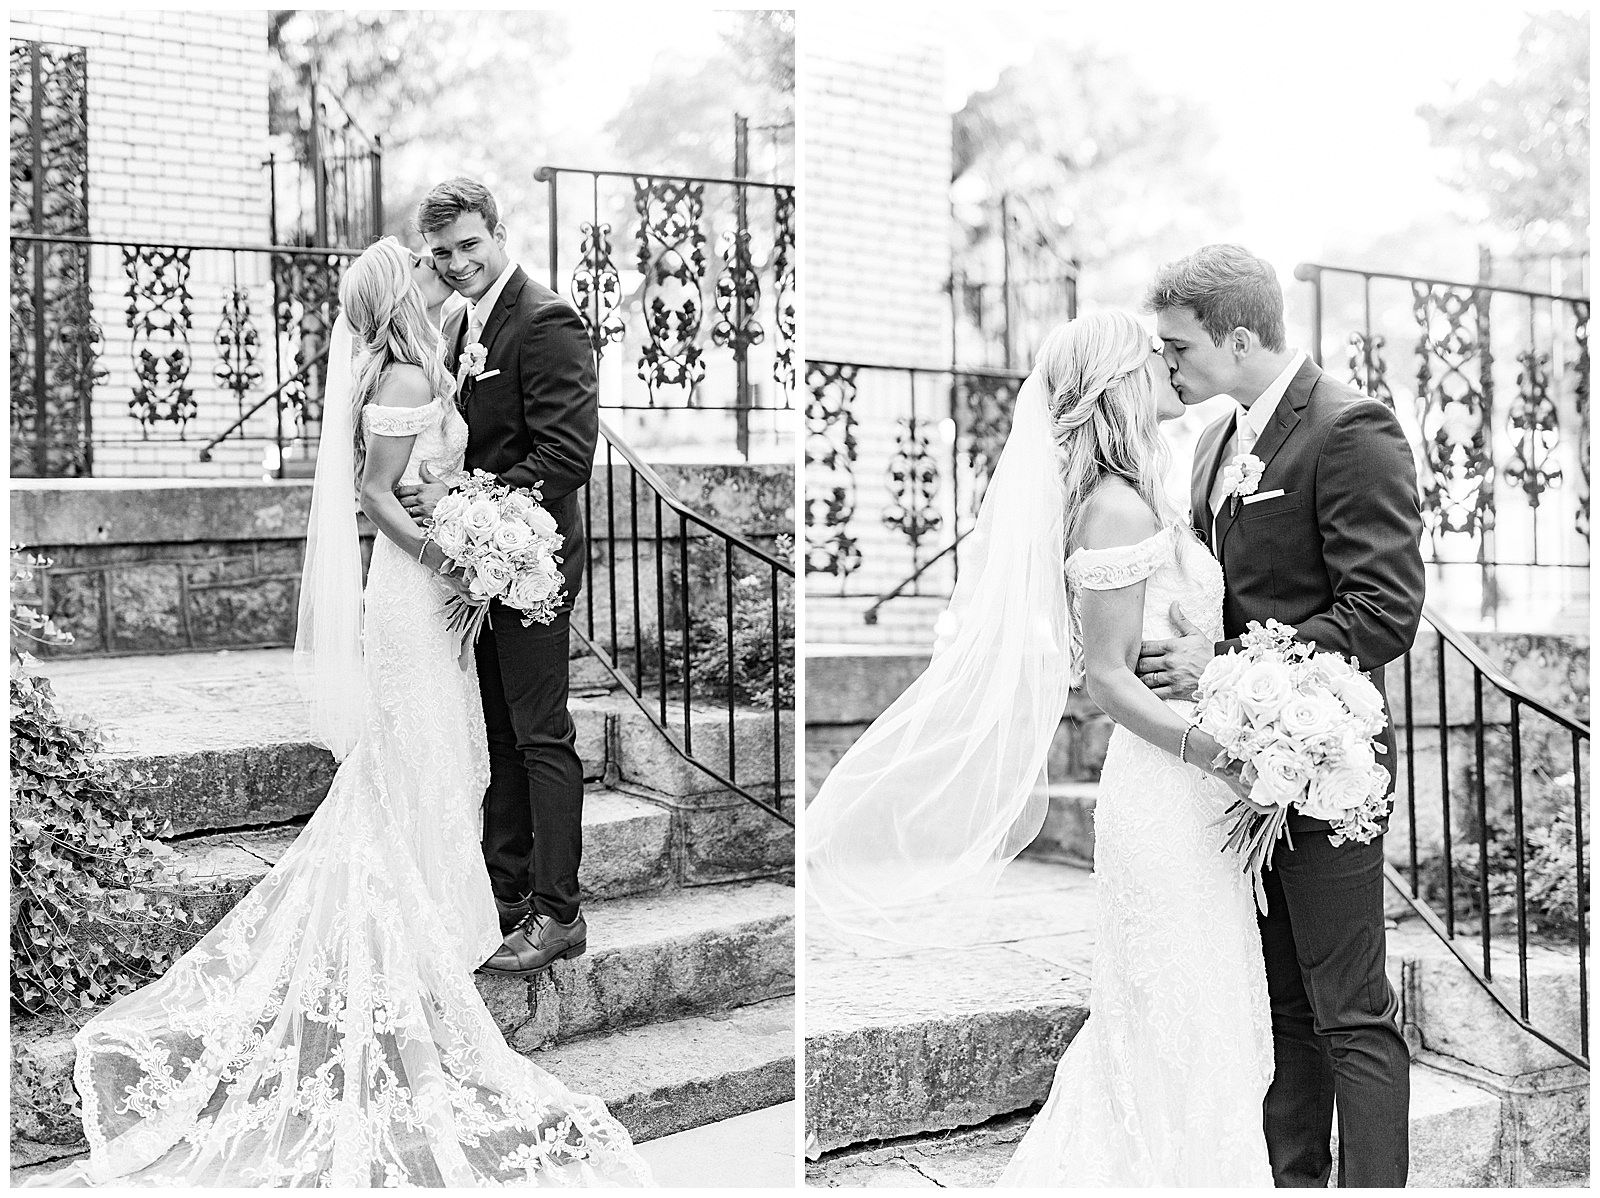 lace dress blond haired bride and dapper navy royal blue groom portraits outdoors under arch at separk mansion summer wedding